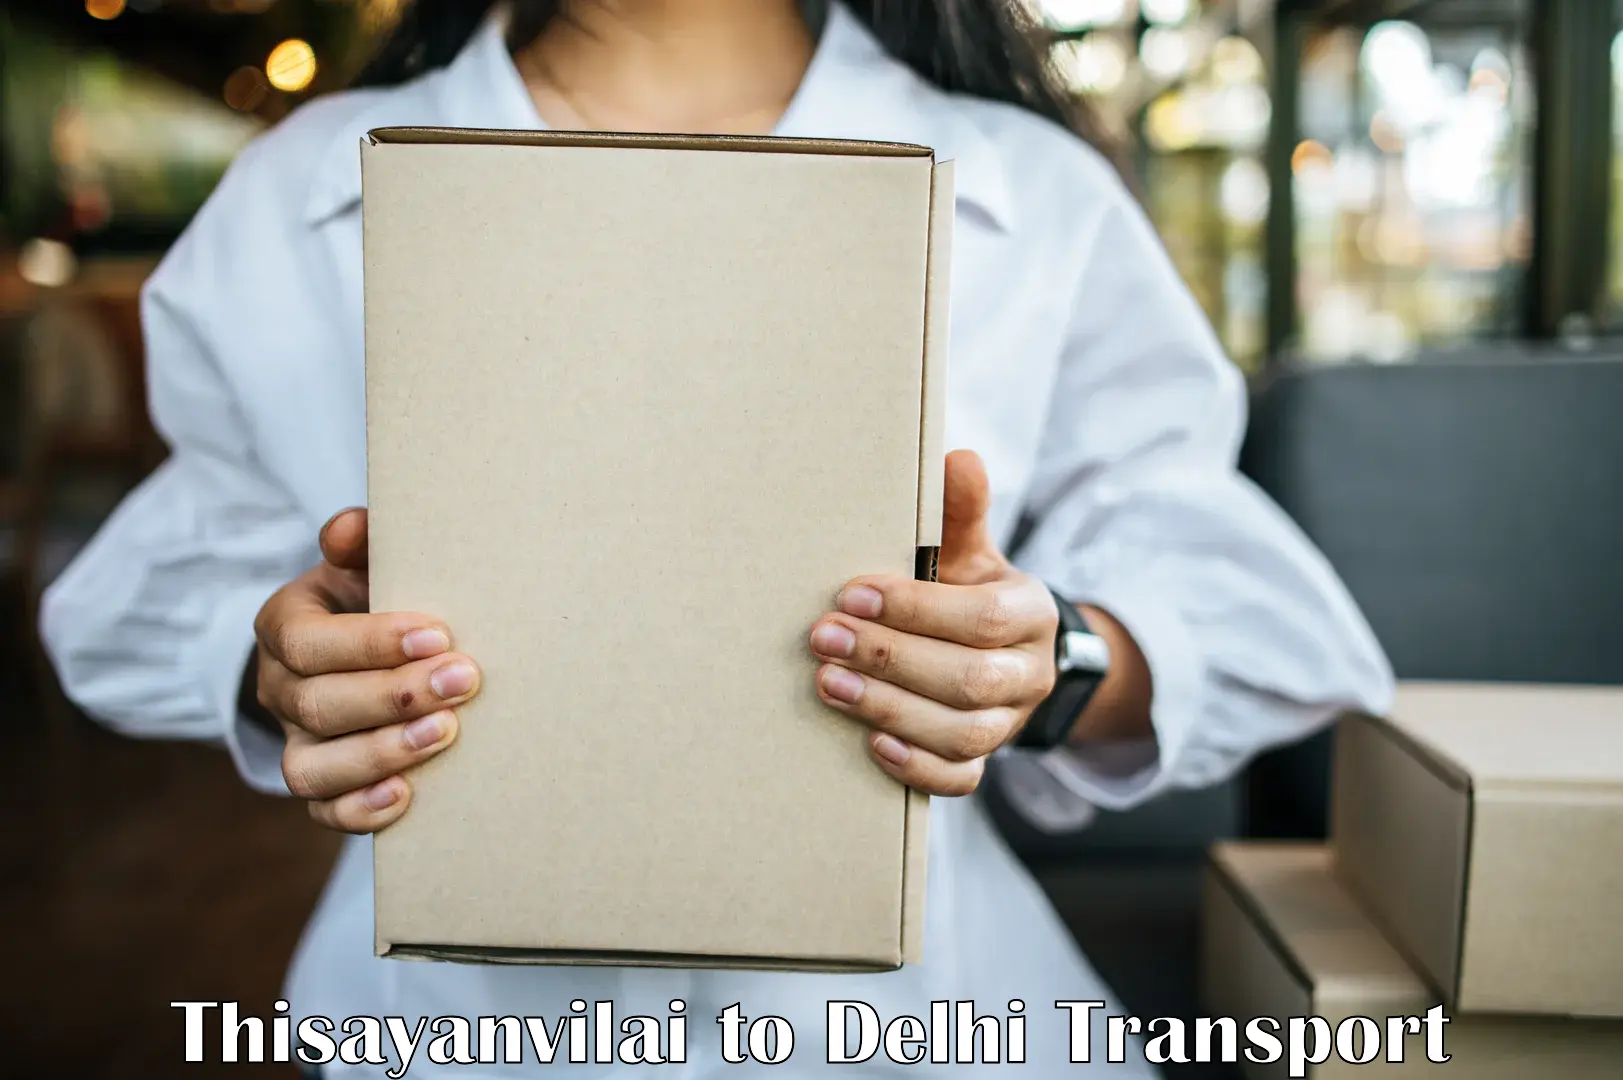 Pick up transport service Thisayanvilai to Lodhi Road